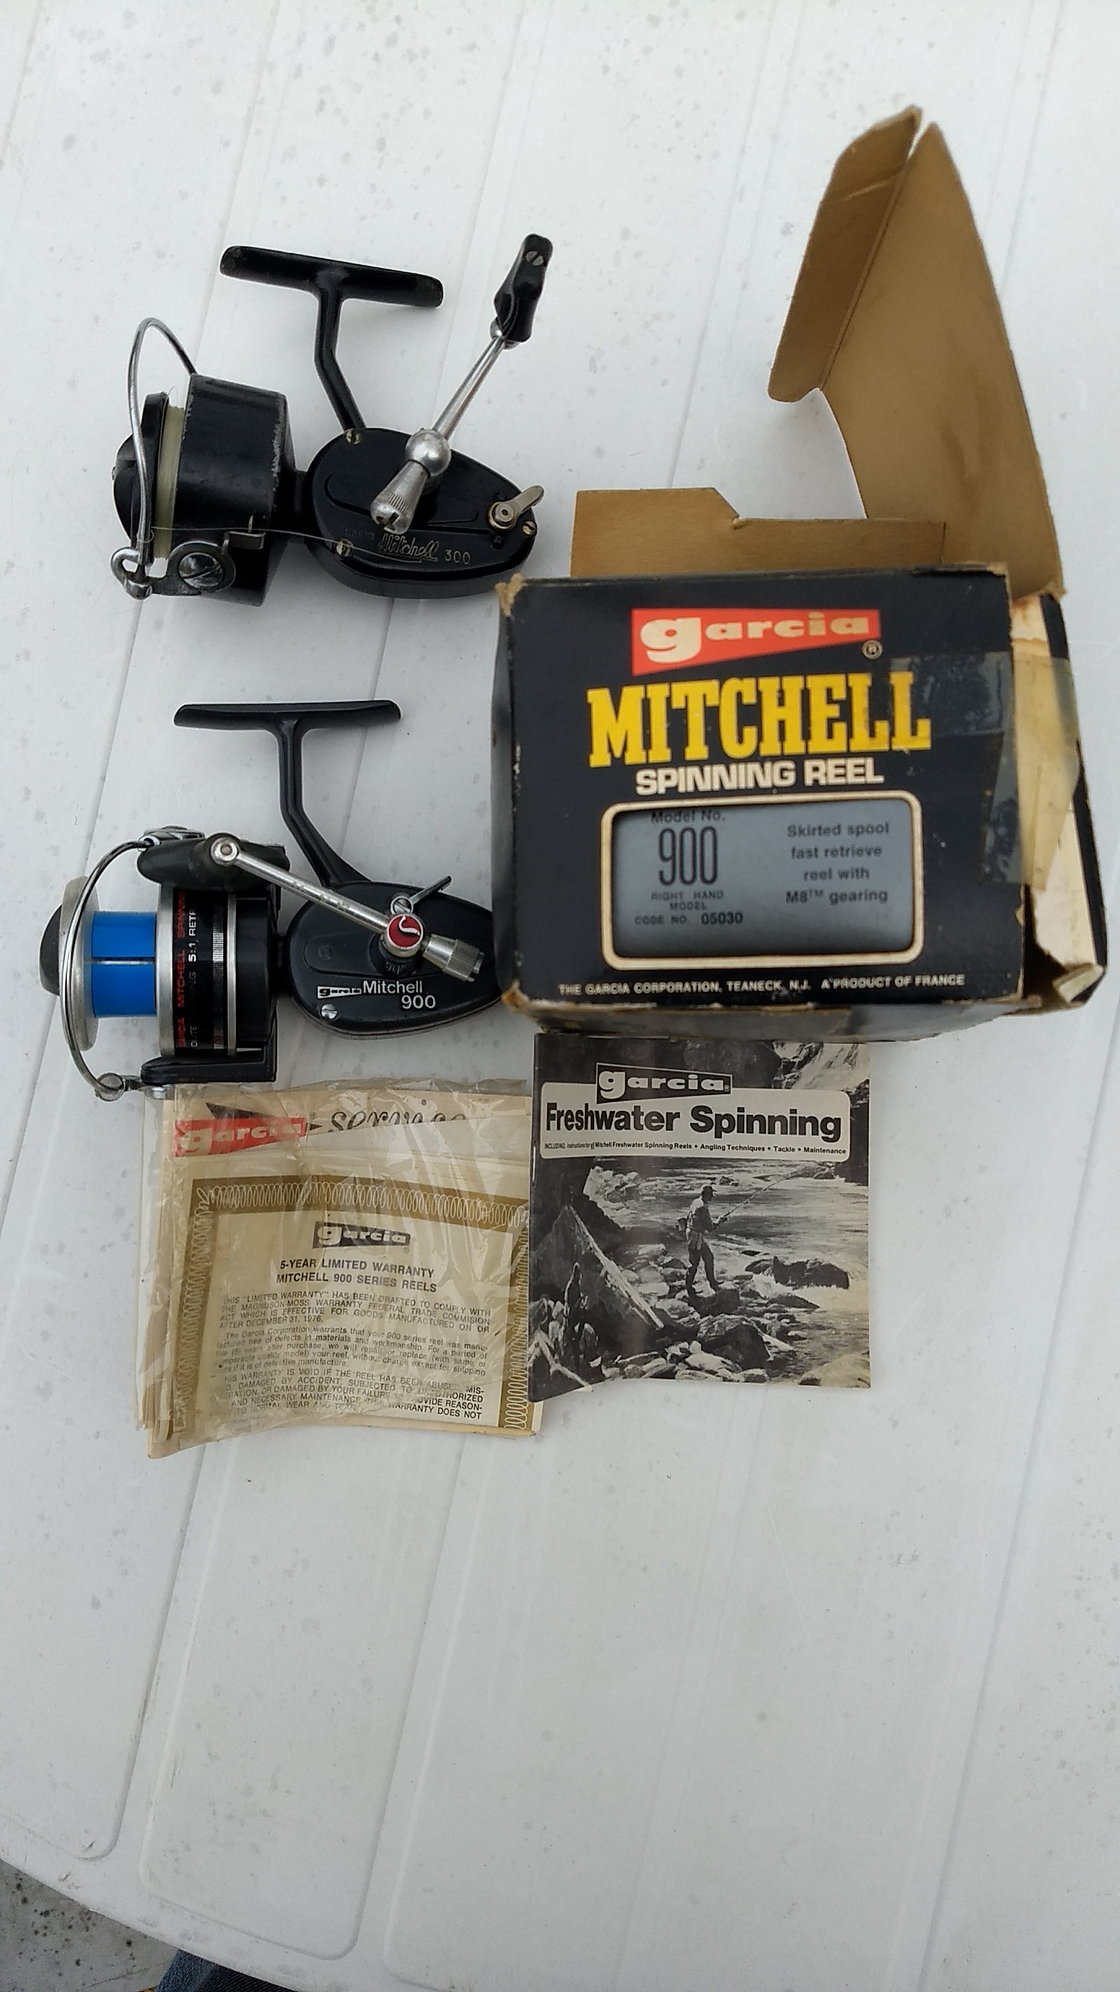 3 new old stock GARCIA MITCHELL 314 315 FISHING REEL AXLES 81164 NOS